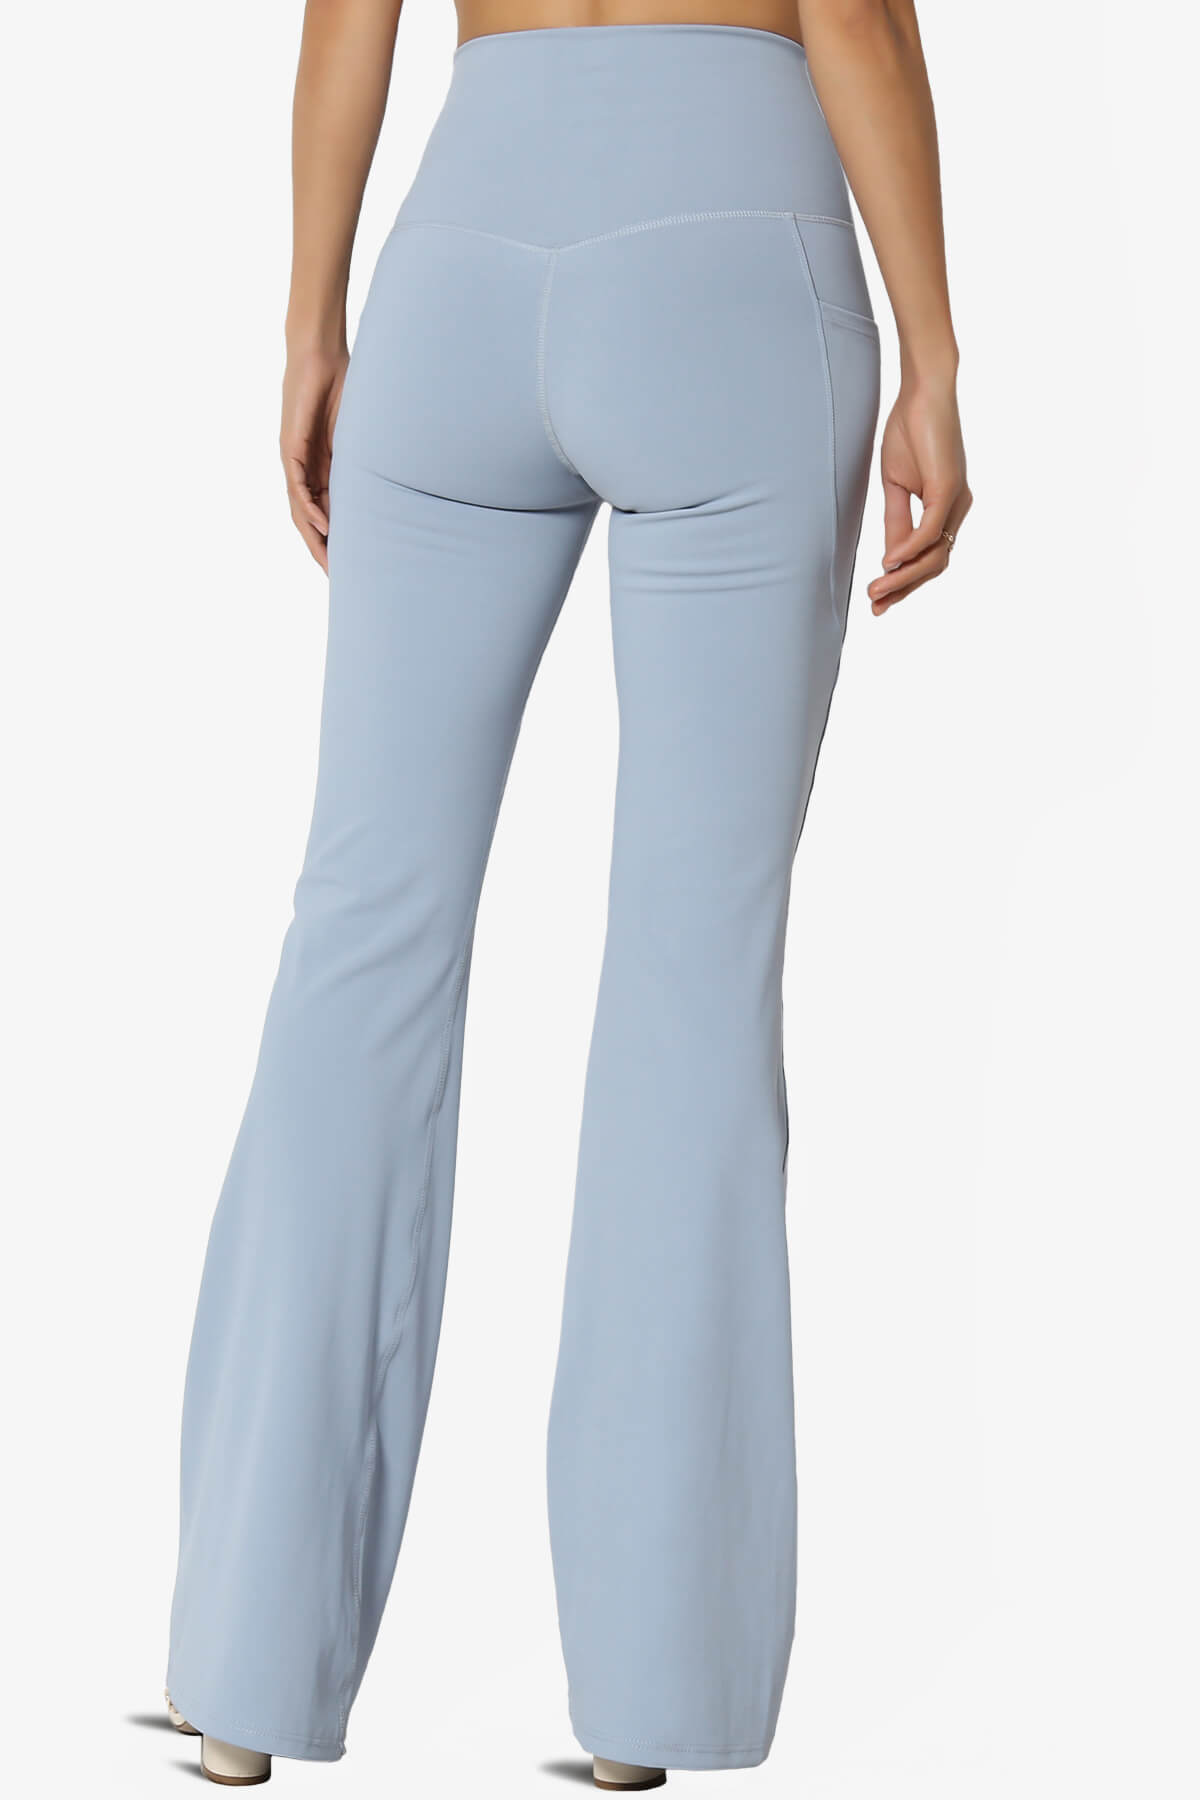 Load image into Gallery viewer, Gemma Athletic Pocket Flare Yoga Pants ASH BLUE_2
